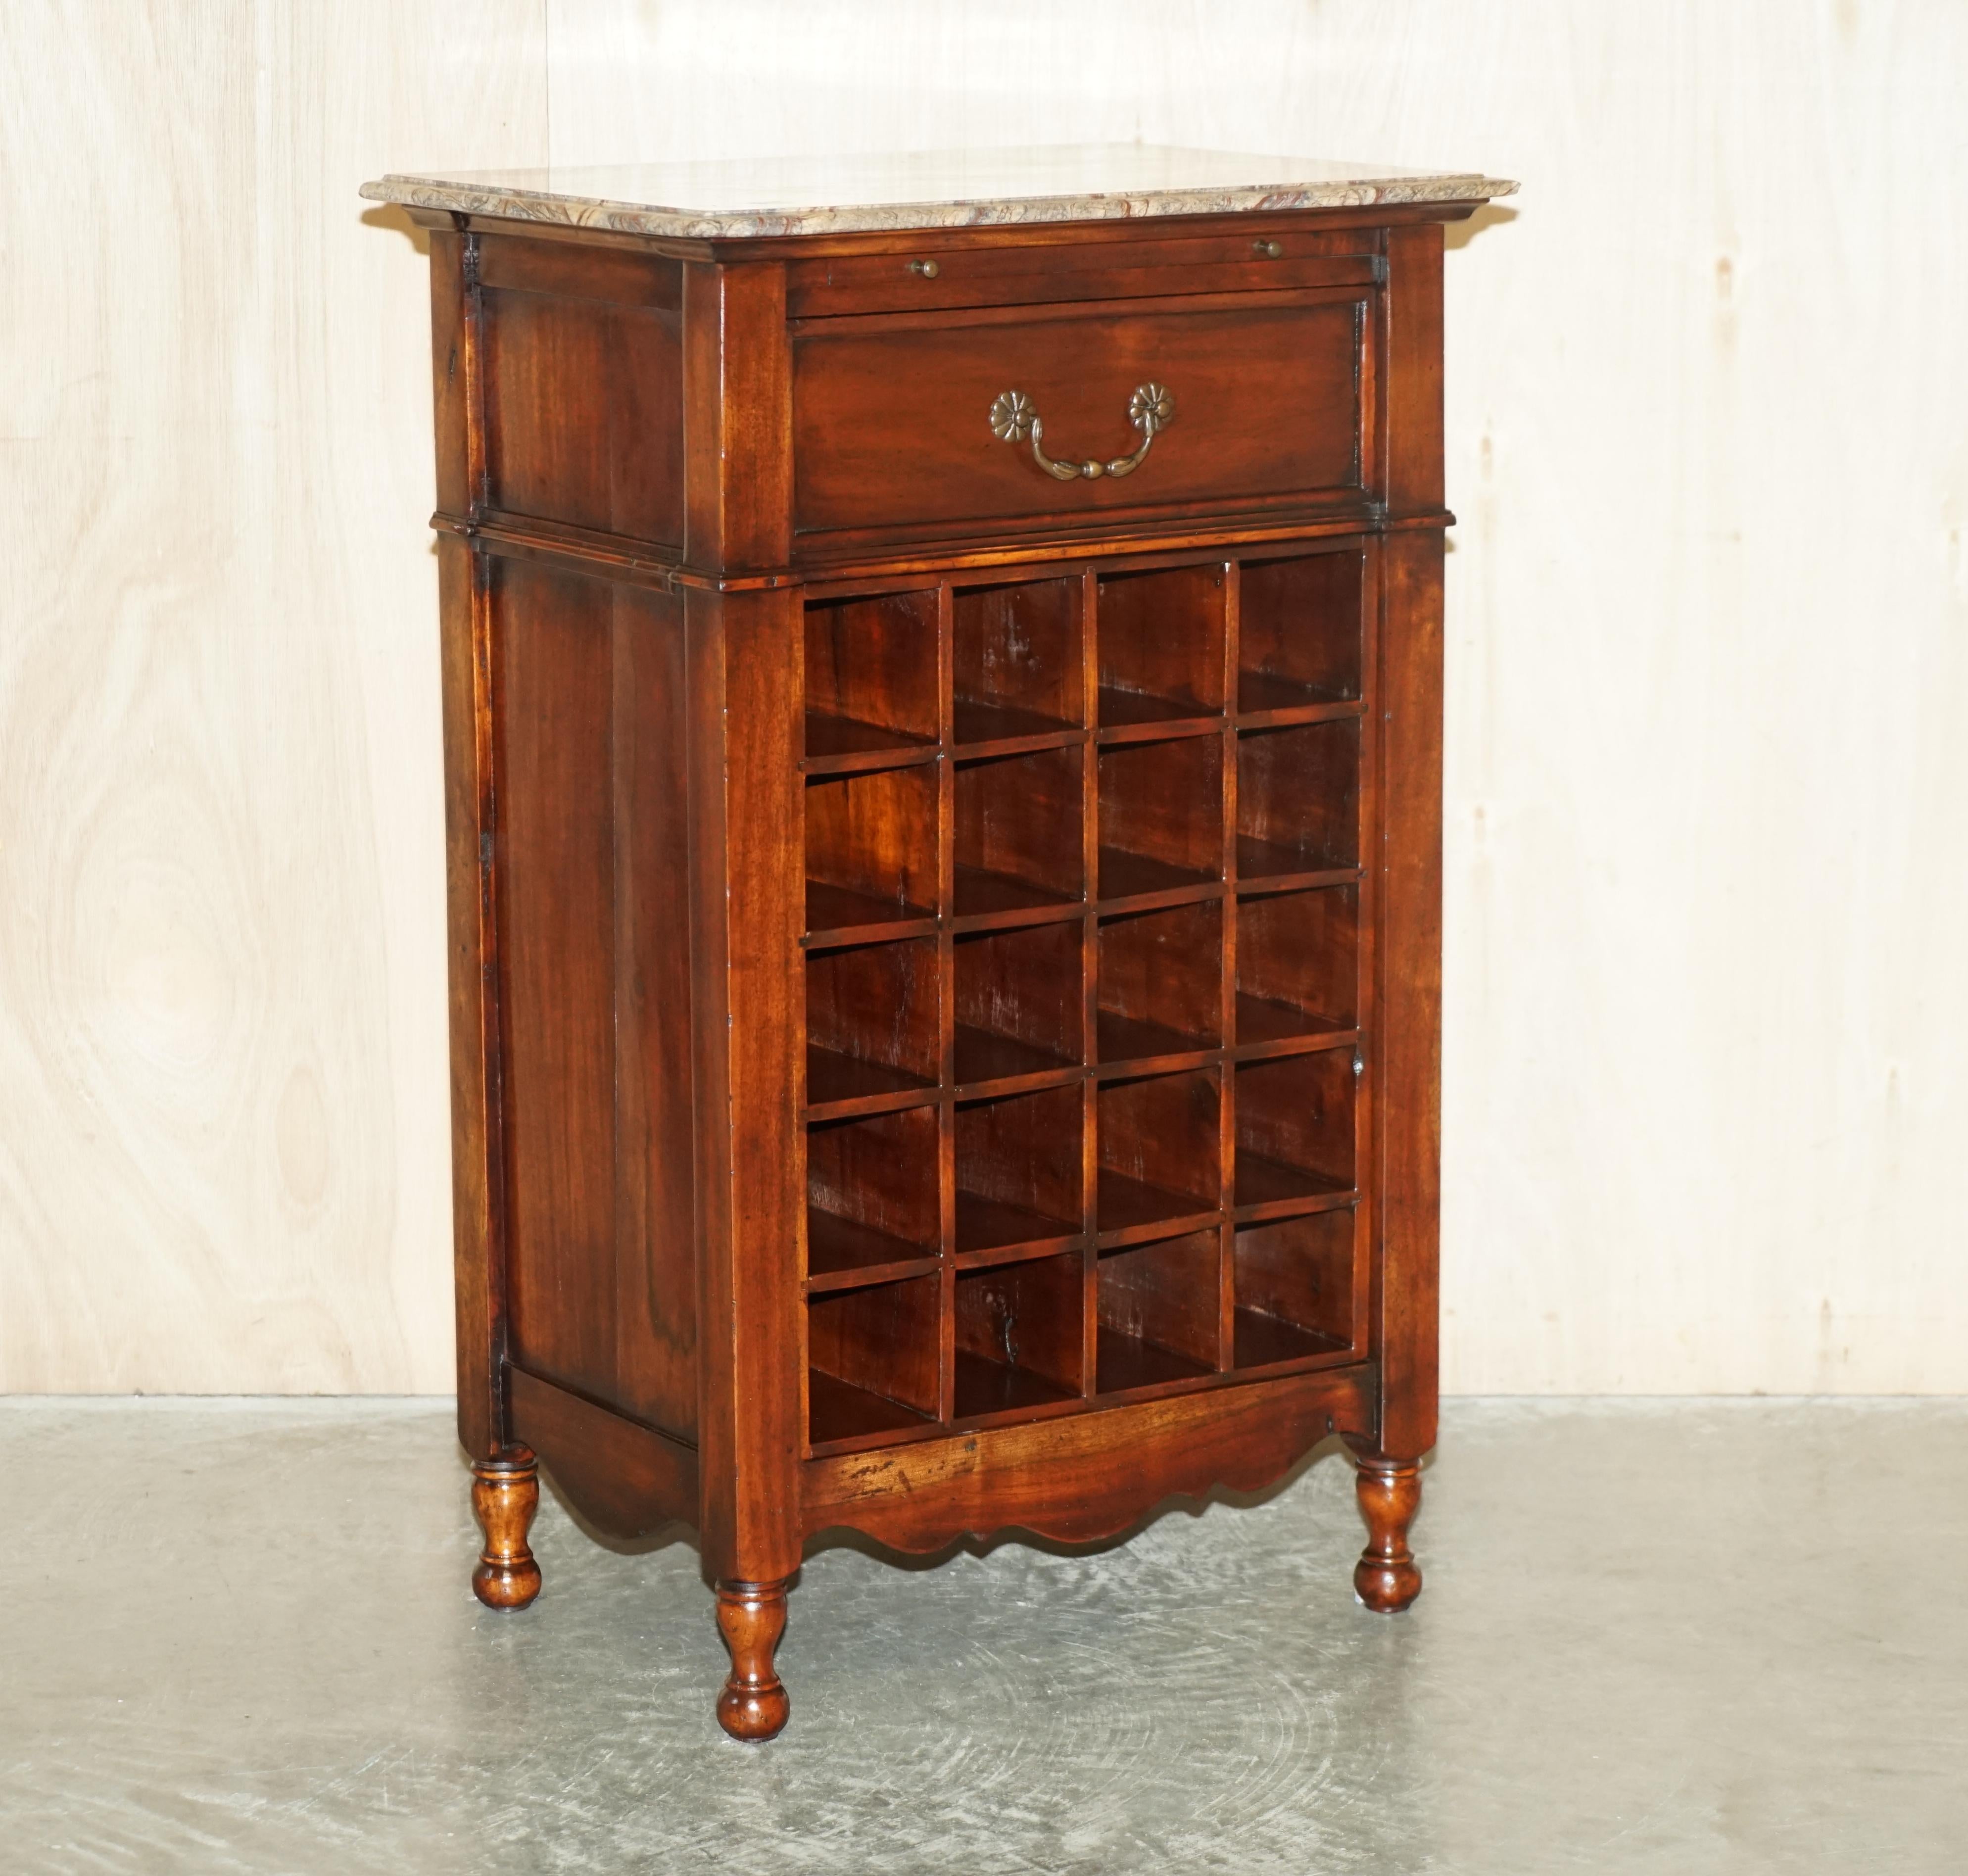 We are delighted to offer for sale this stunning vintage Mahogany Marble topped side table with Butlers serving tray and x20 bottle holders

A very good looking and well-made piece, this piece can hold more than an entire how wine collection, the